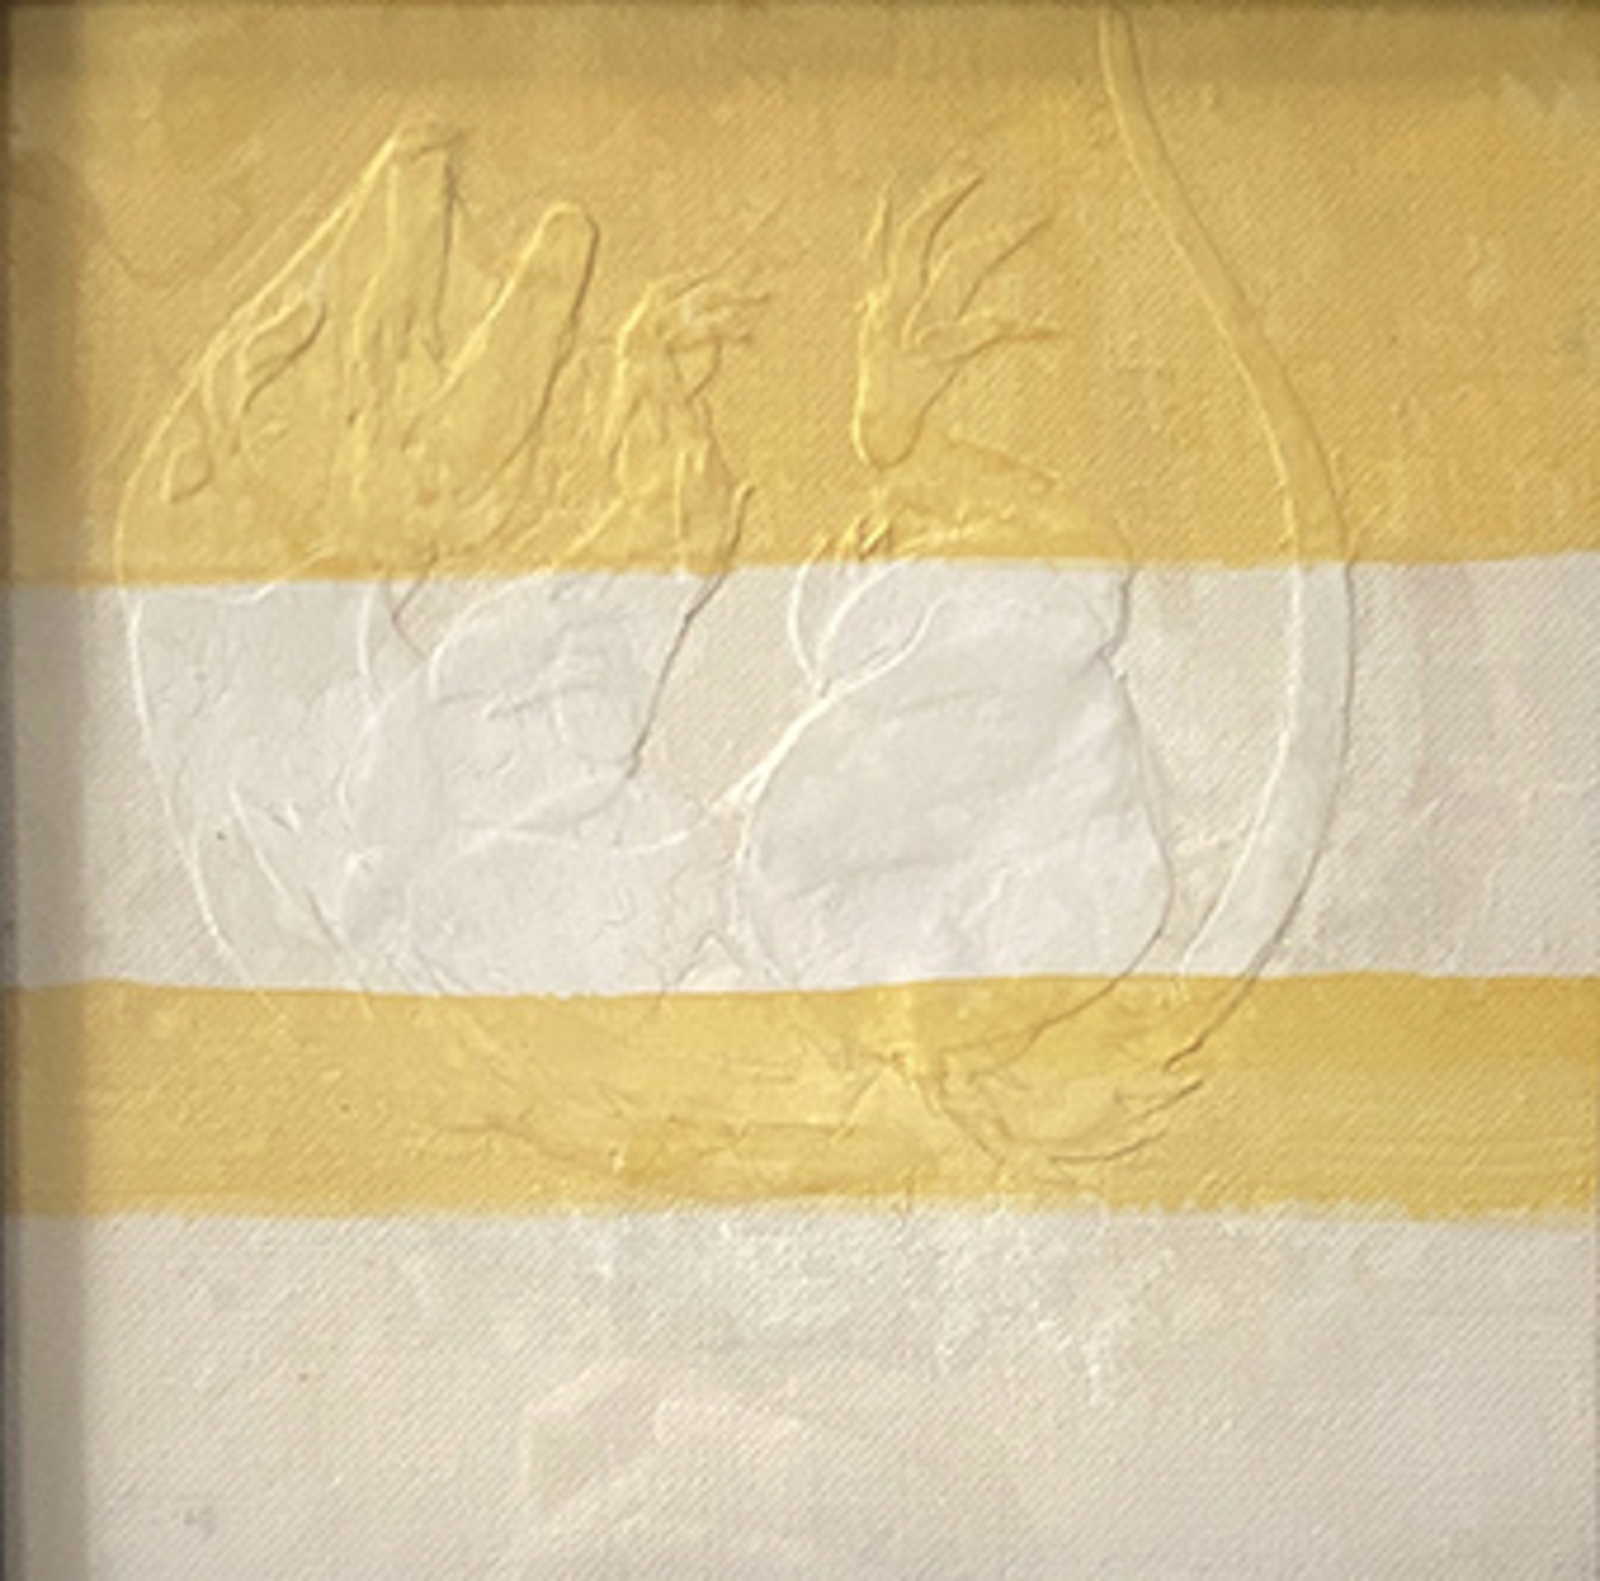 An artwork at the gallery depicting the outline of a falling animal on top of a yellow and white striped backgrounhd